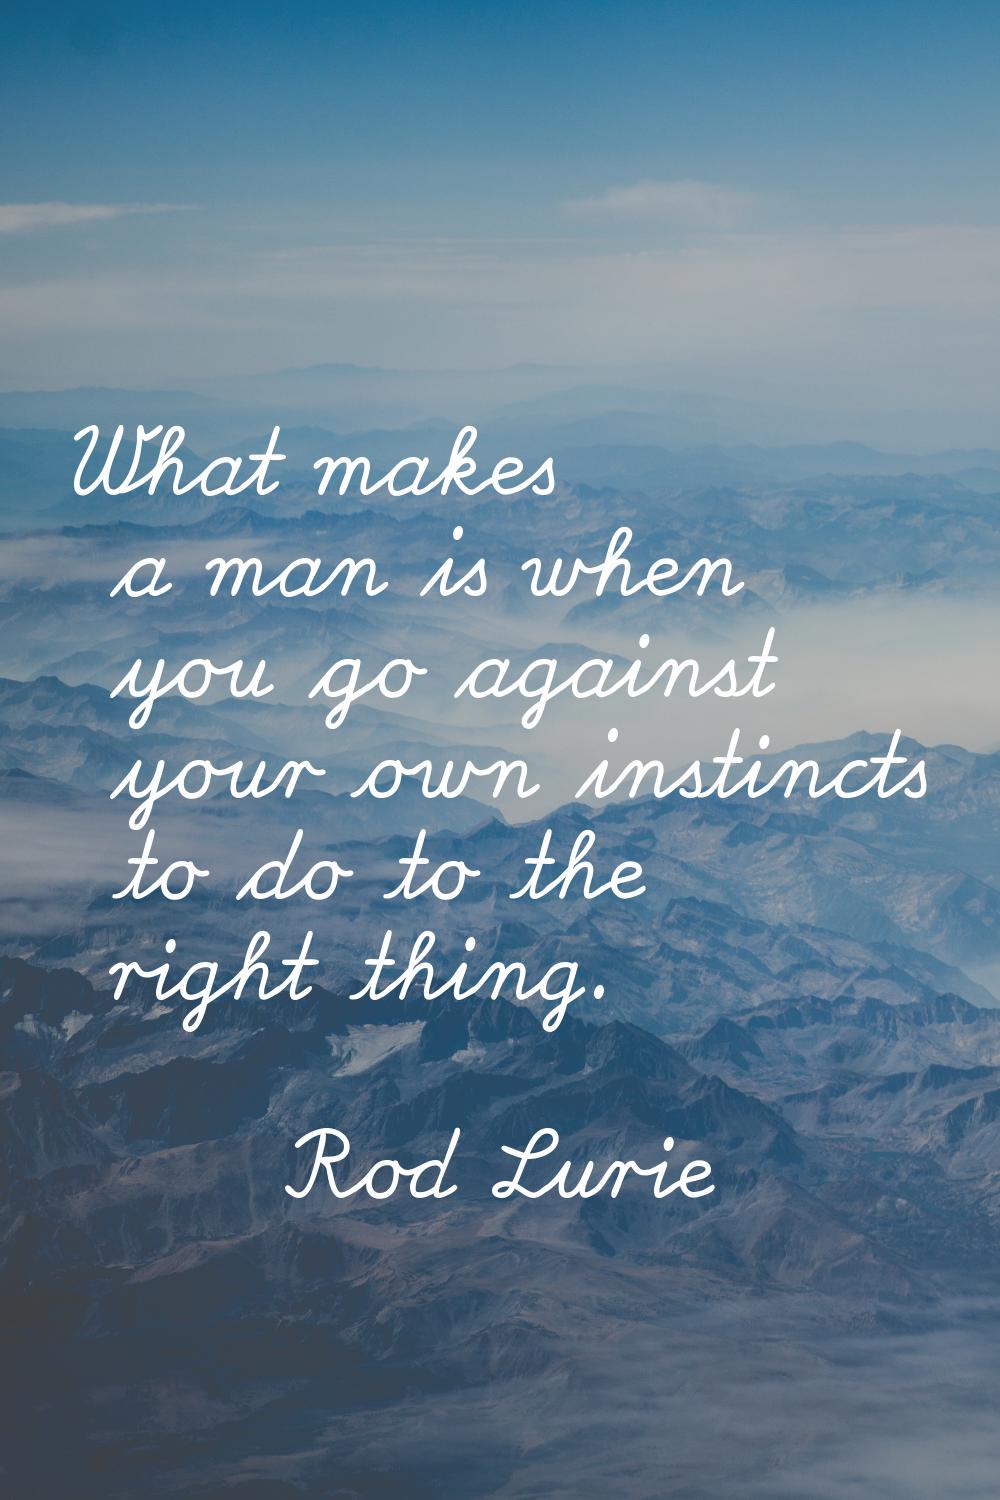 What makes a man is when you go against your own instincts to do to the right thing.